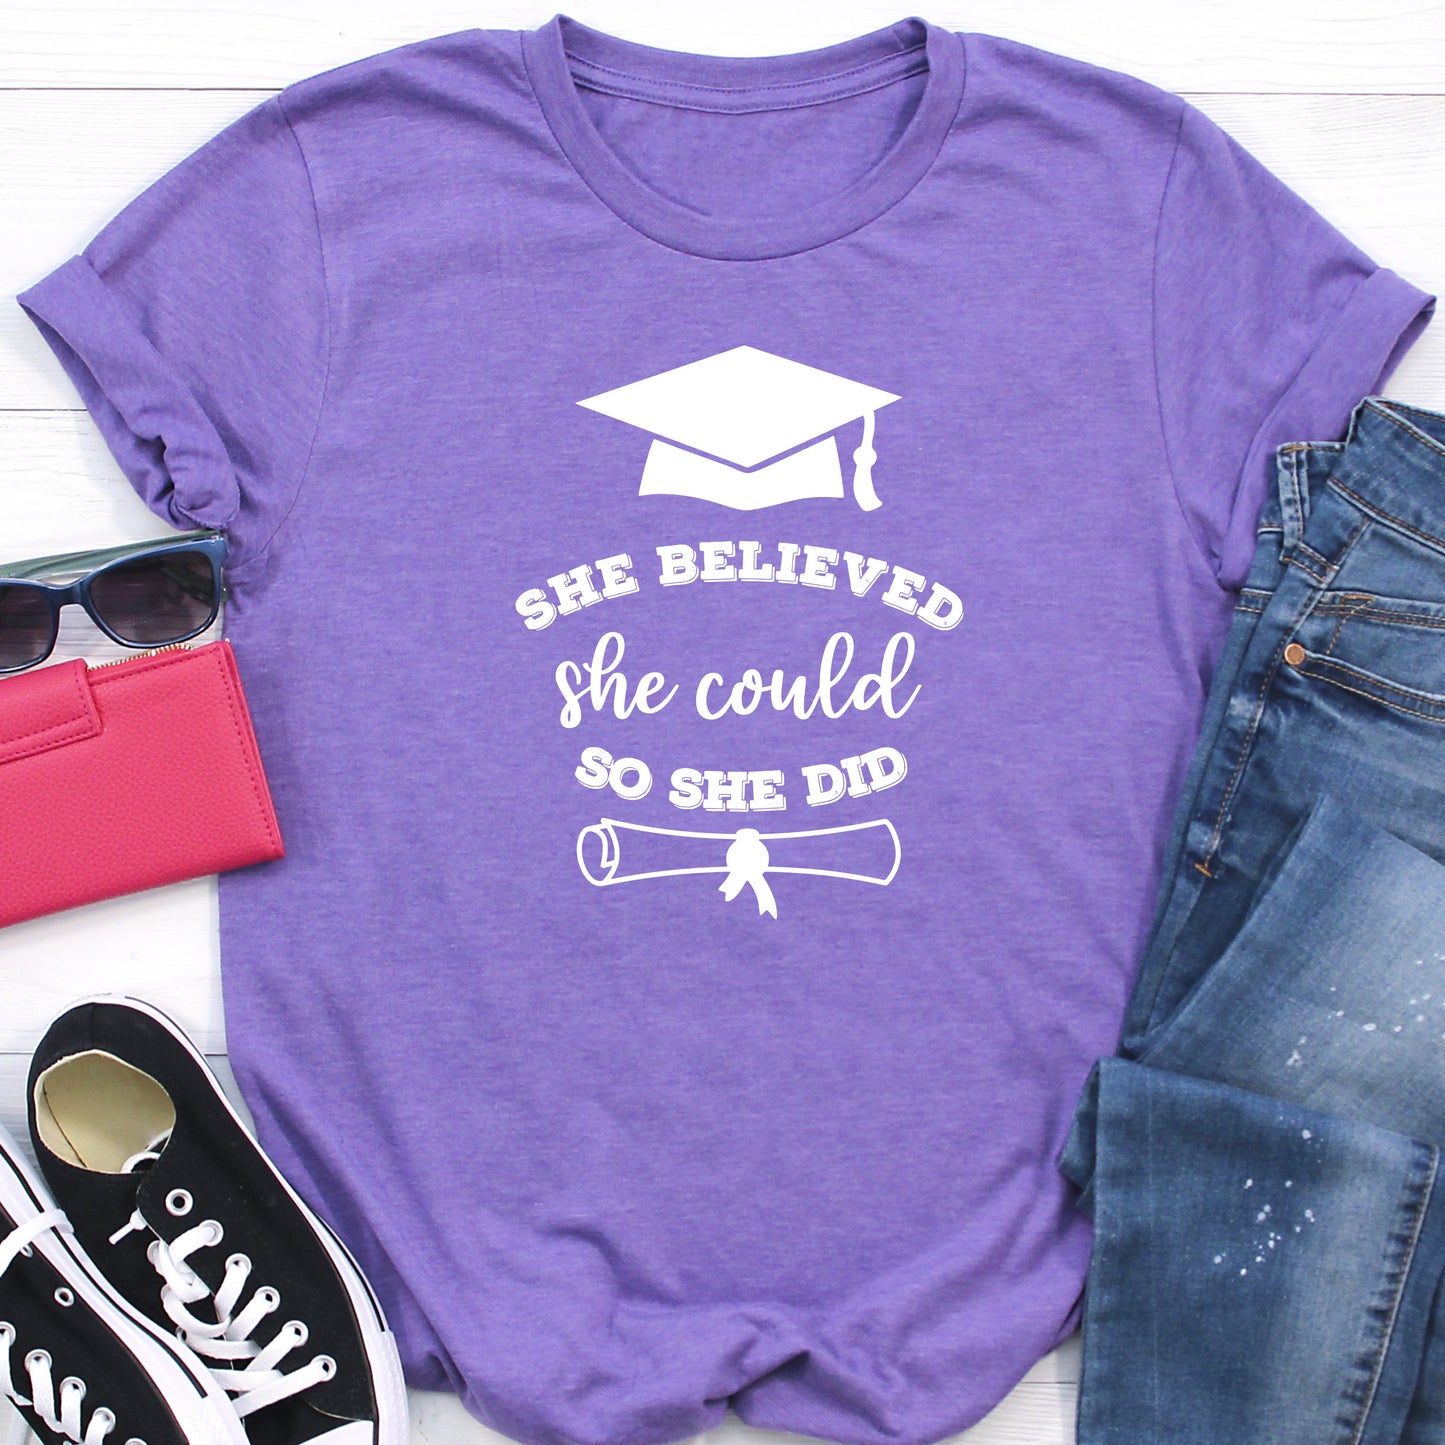 She Believed She Could - Graduation